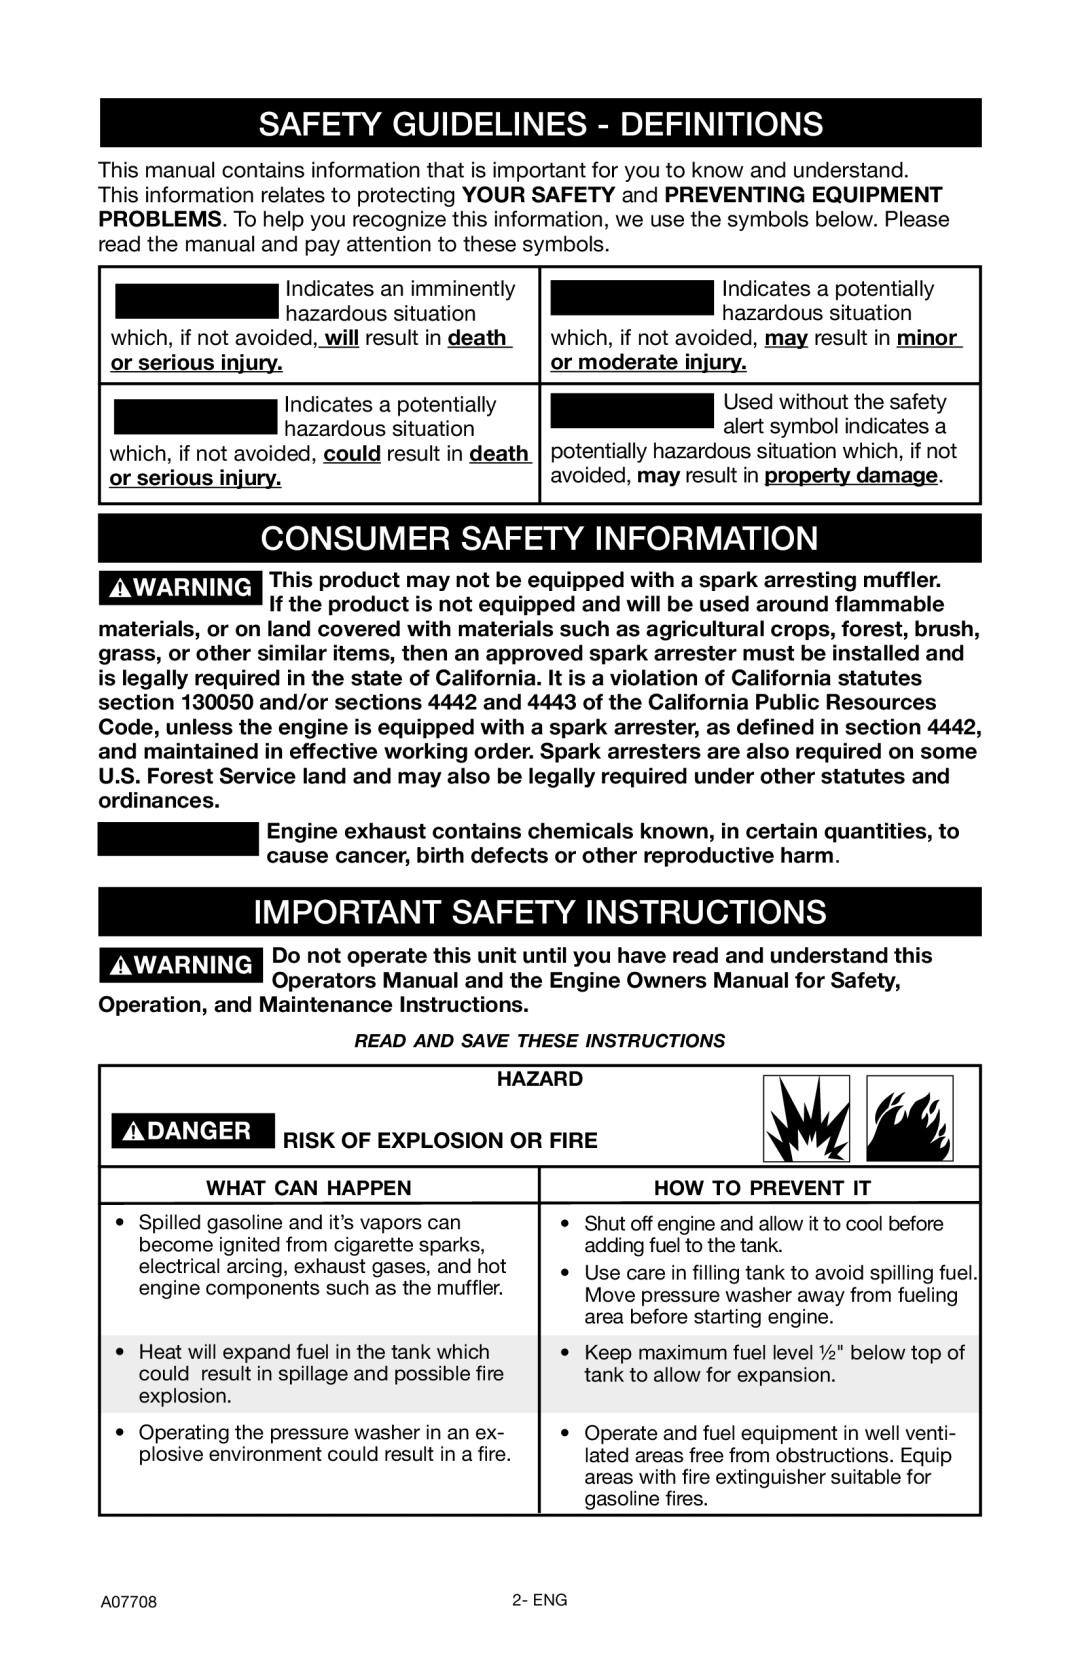 Porter-Cable PCH2800C Safety Guidelines - Definitions, Consumer Safety Information, Important Safety Instructions 